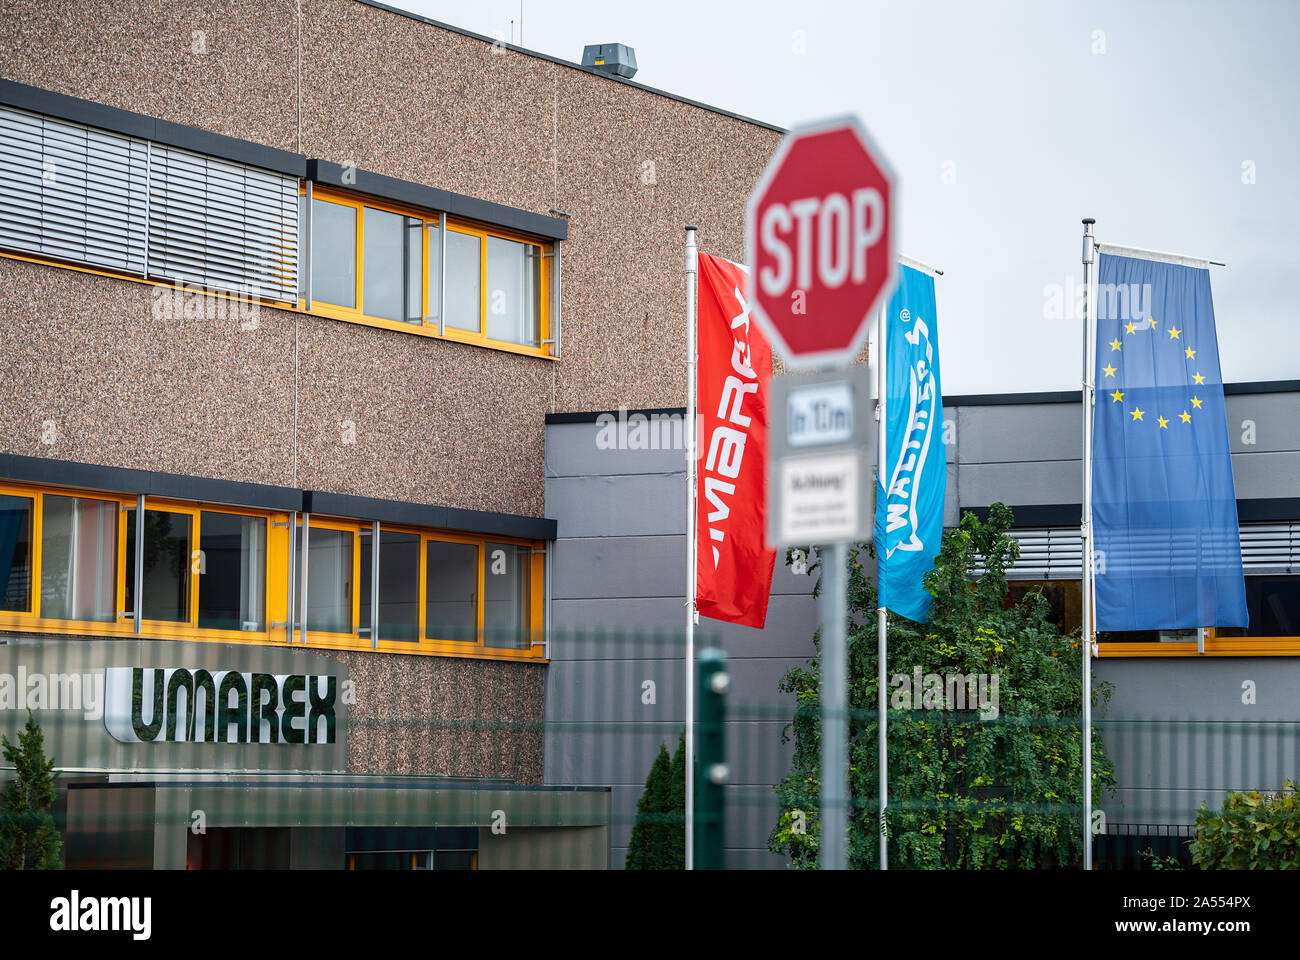 17 October 2019, North Rhine-Westphalia, Arnsberg: The company logo hangs on the outer facade of the weapons manufacturer Umarex, in front of which a flag of the weapons brand Walther is flying. Because for years he is said to have smuggled pistol parts from a weapons manufacturer's factory, assembled and sold them, a 47-year-old man is now on trial in Arnsberg, Sauerland. Since 2015, the long-time employee of the Arnsberg-based sporting weapons manufacturer Umarex has been reported to have repeatedly stolen design drawings and weapon parts from his former employer and assembled them into func Stock Photo